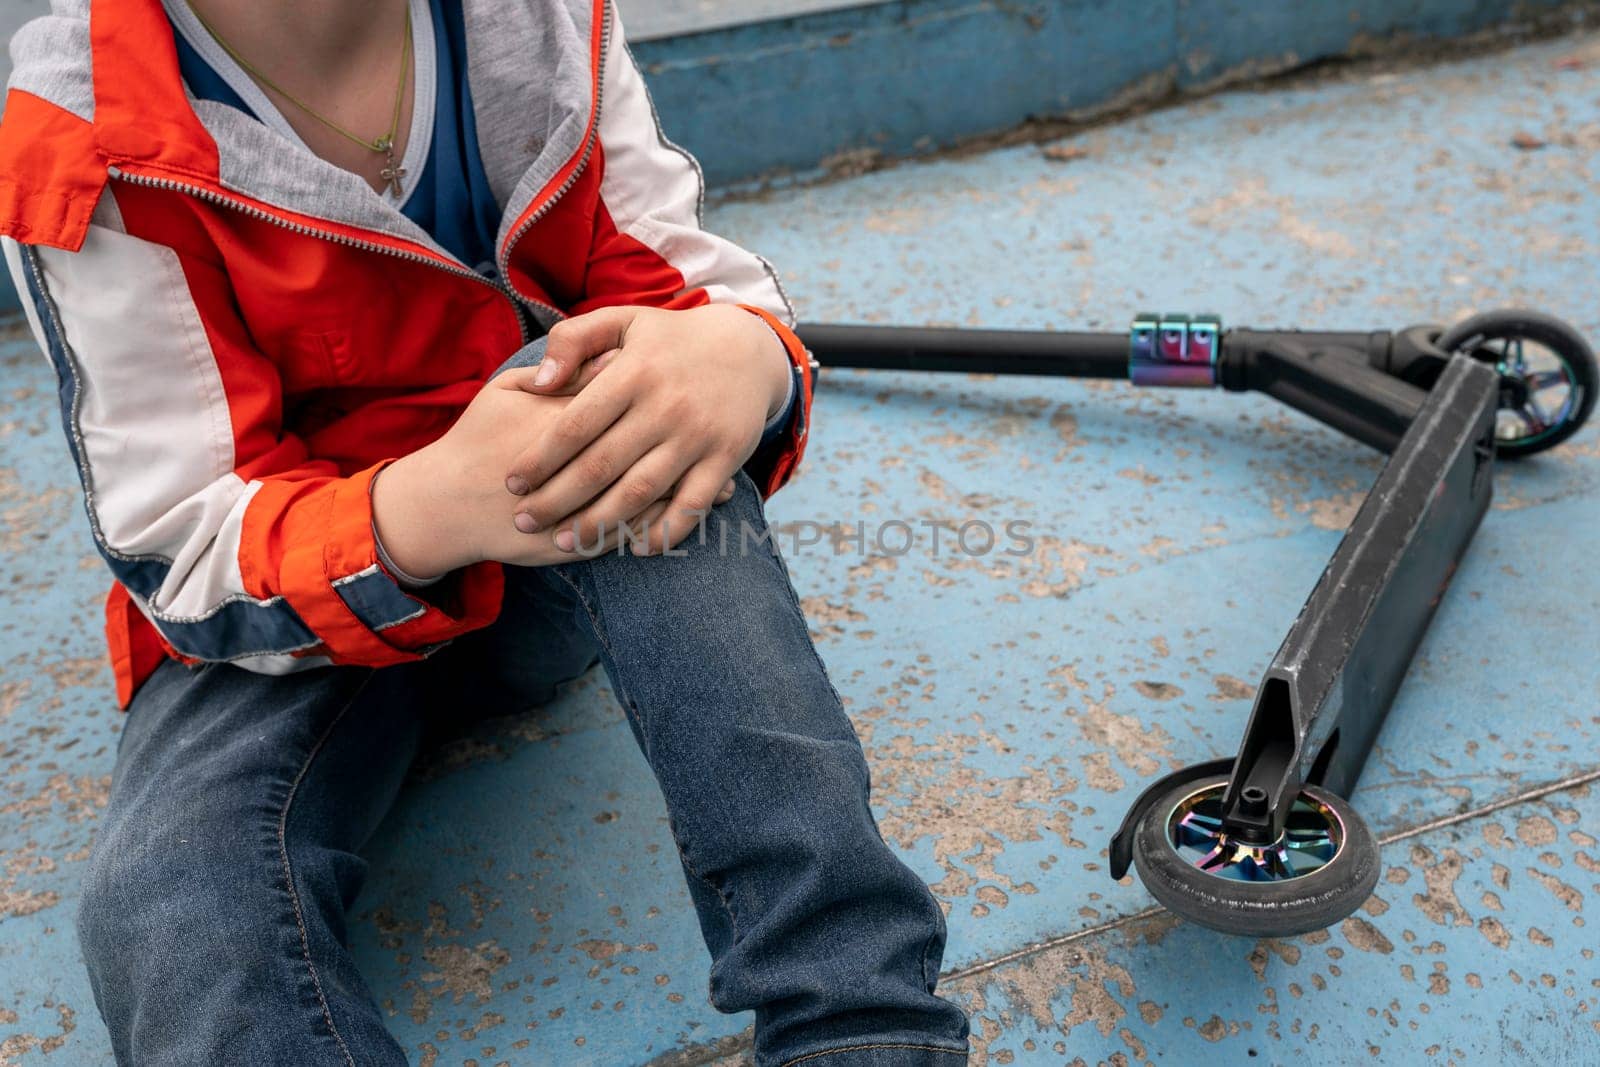 boy holds onto a bruised knee after falling from a stunt scooter by audiznam2609